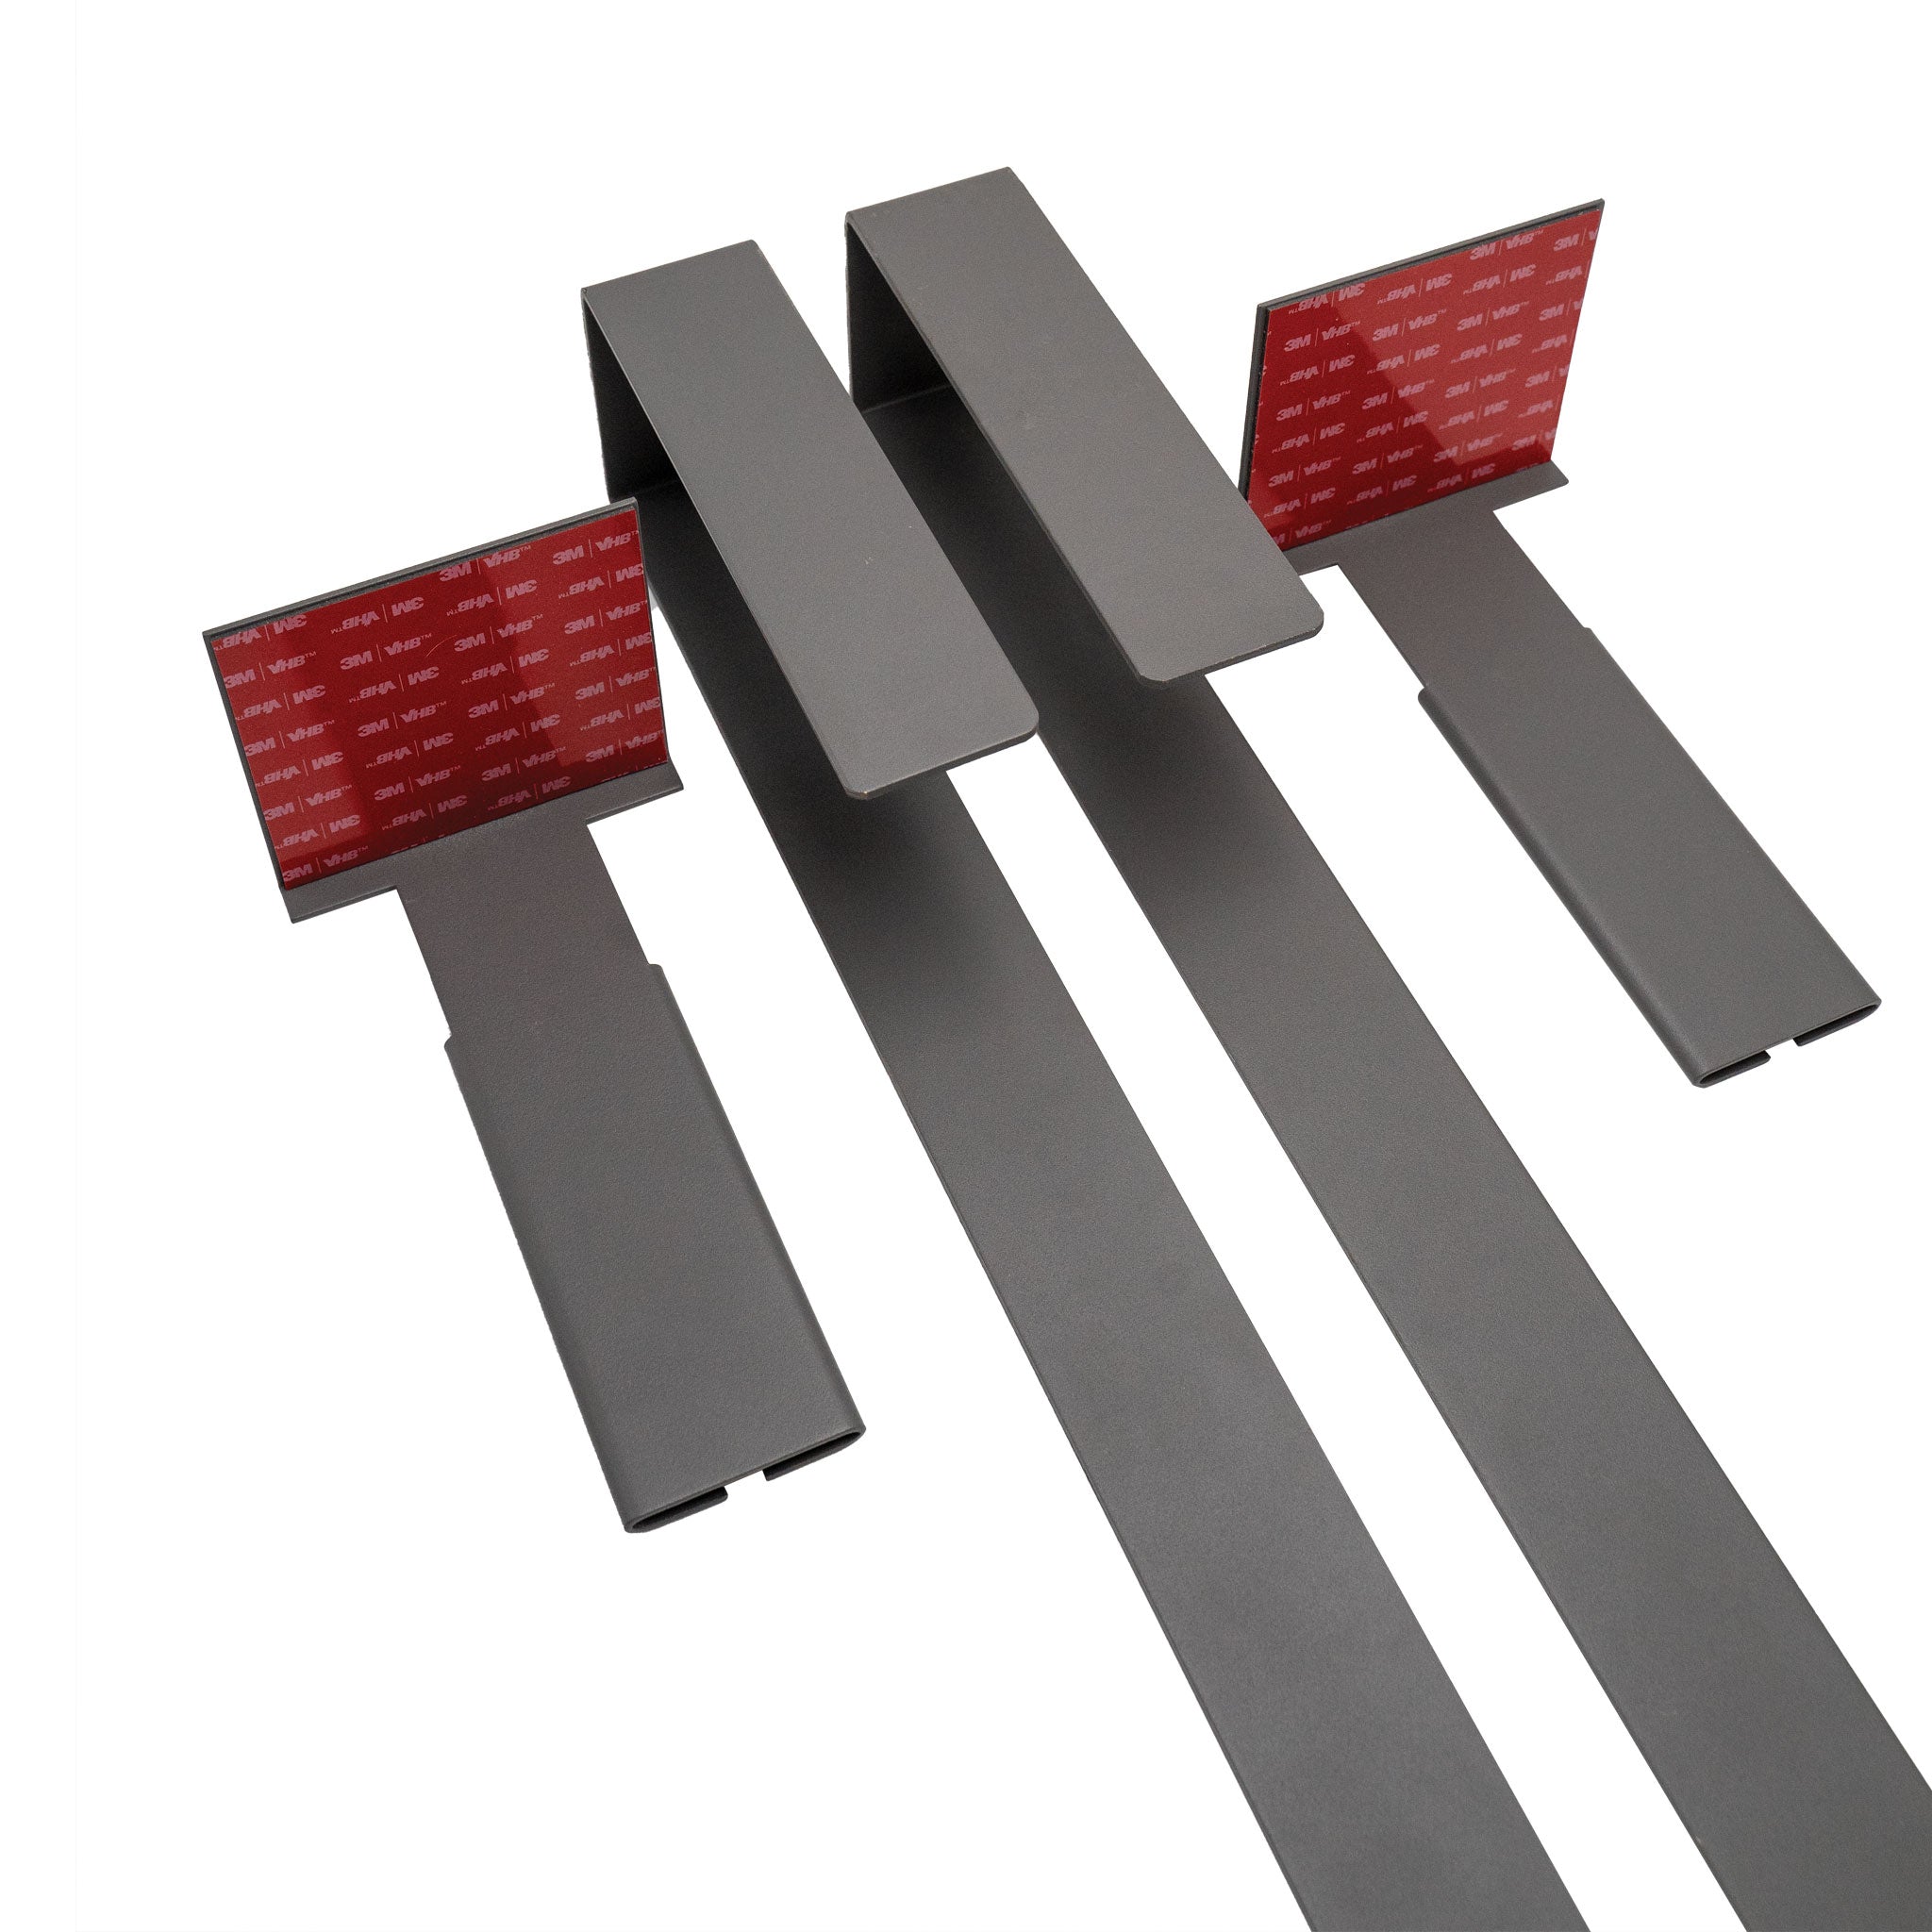 Fangs Partition Mounting Device Cubicle Fangs - Sign Fasteners Sign  Fasteners Cubicle Pins Metal fasteners Sign fasteners